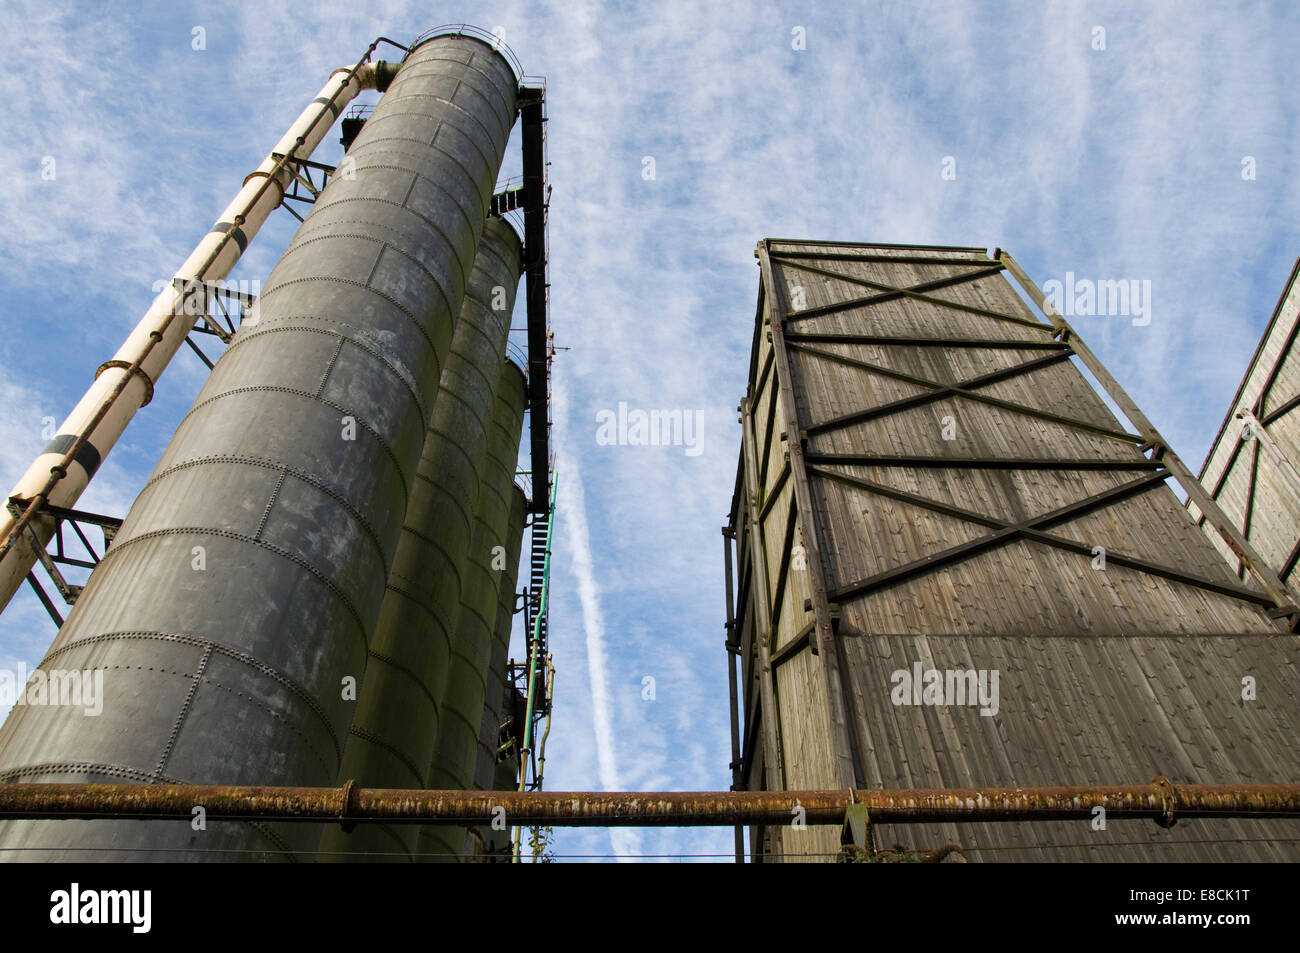 Industrial towers used in the coke and coal industry. abandoned and rusting away. Stock Photo